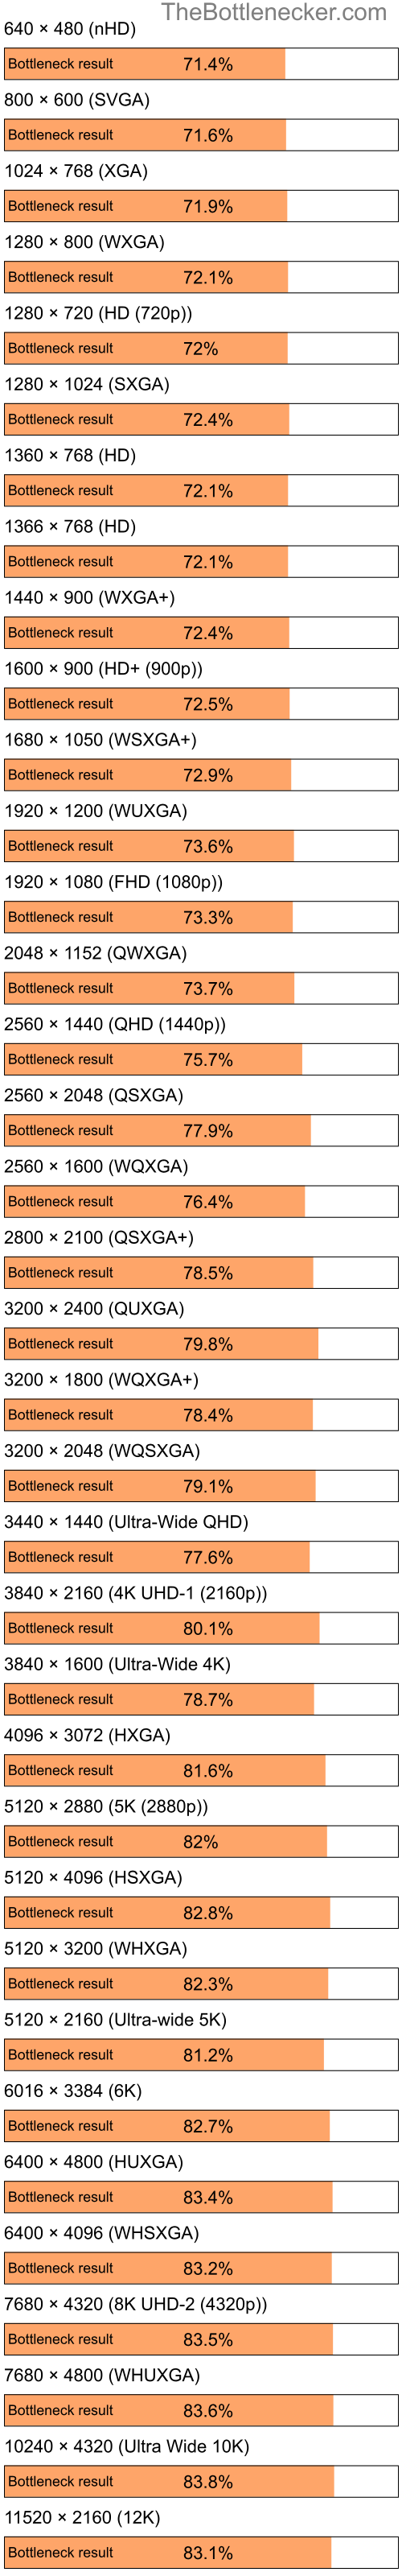 Bottleneck results by resolution for Intel Pentium 4 and AMD Radeon X800 XL in Graphic Card Intense Tasks